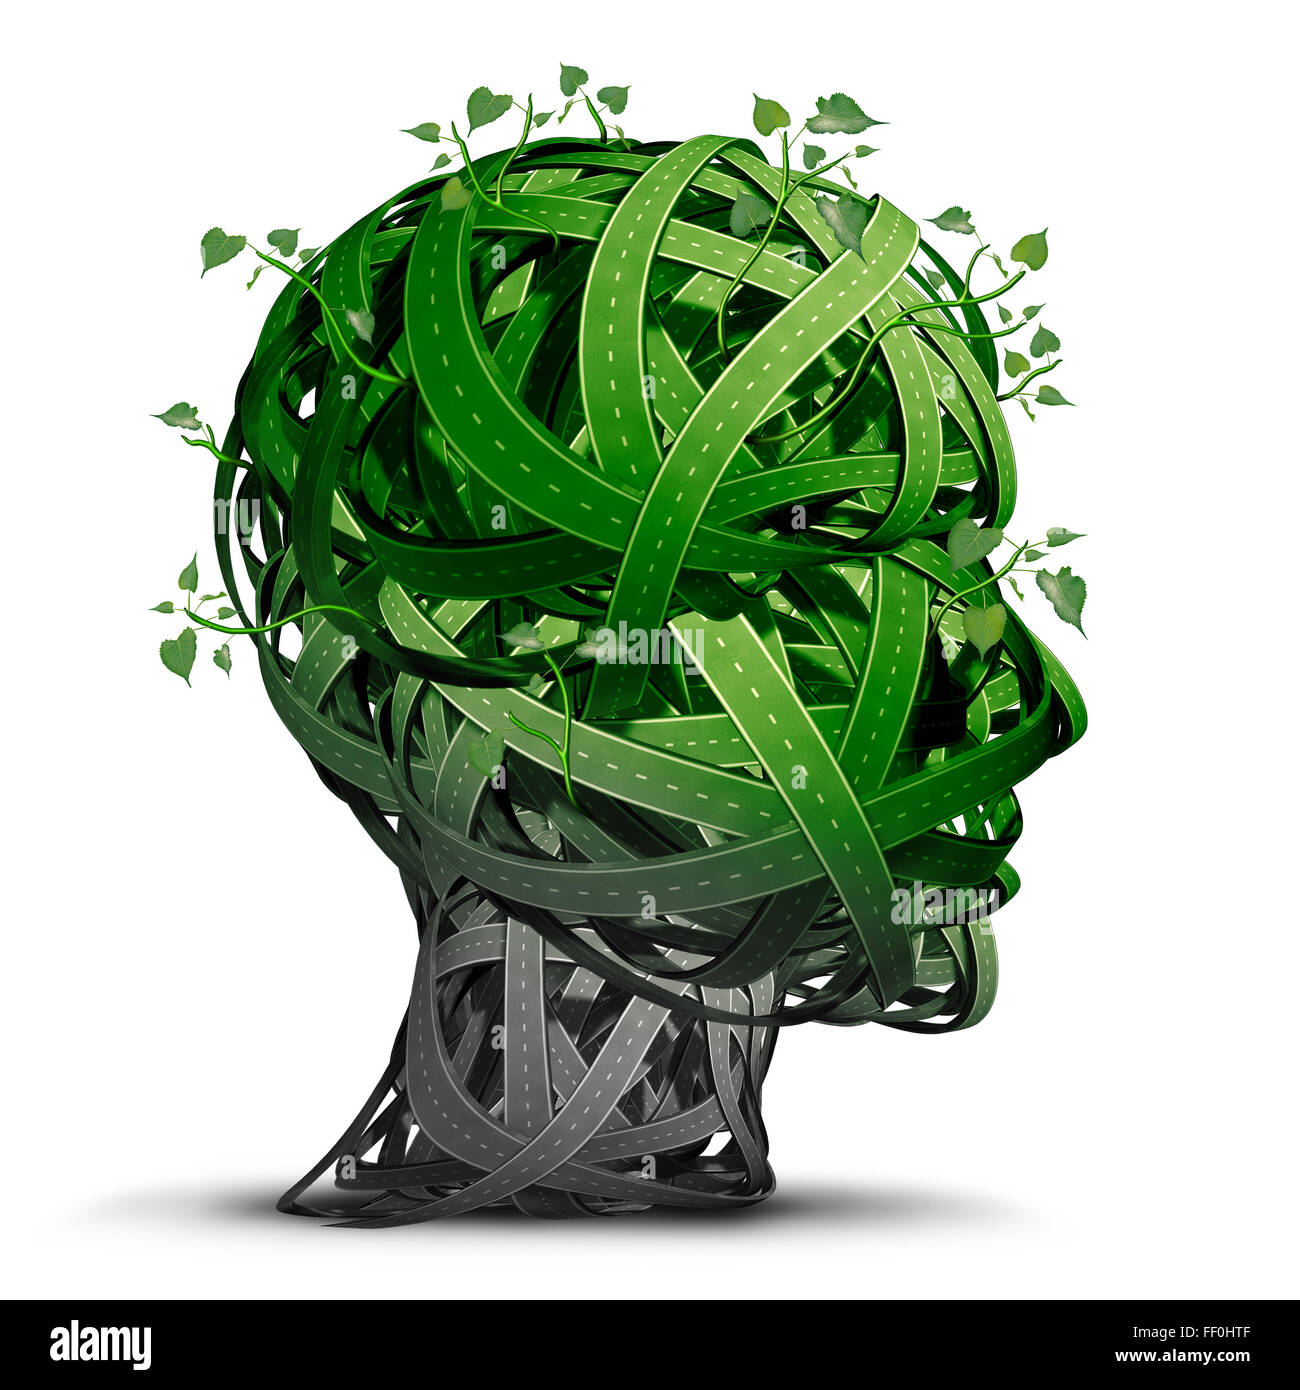 Green transportation thinking and alternative fuel symbol as a group of green roads shaped as a human head representing the growing ecological friendly clean energy transport solutions as electric vehicle technology. Stock Photo